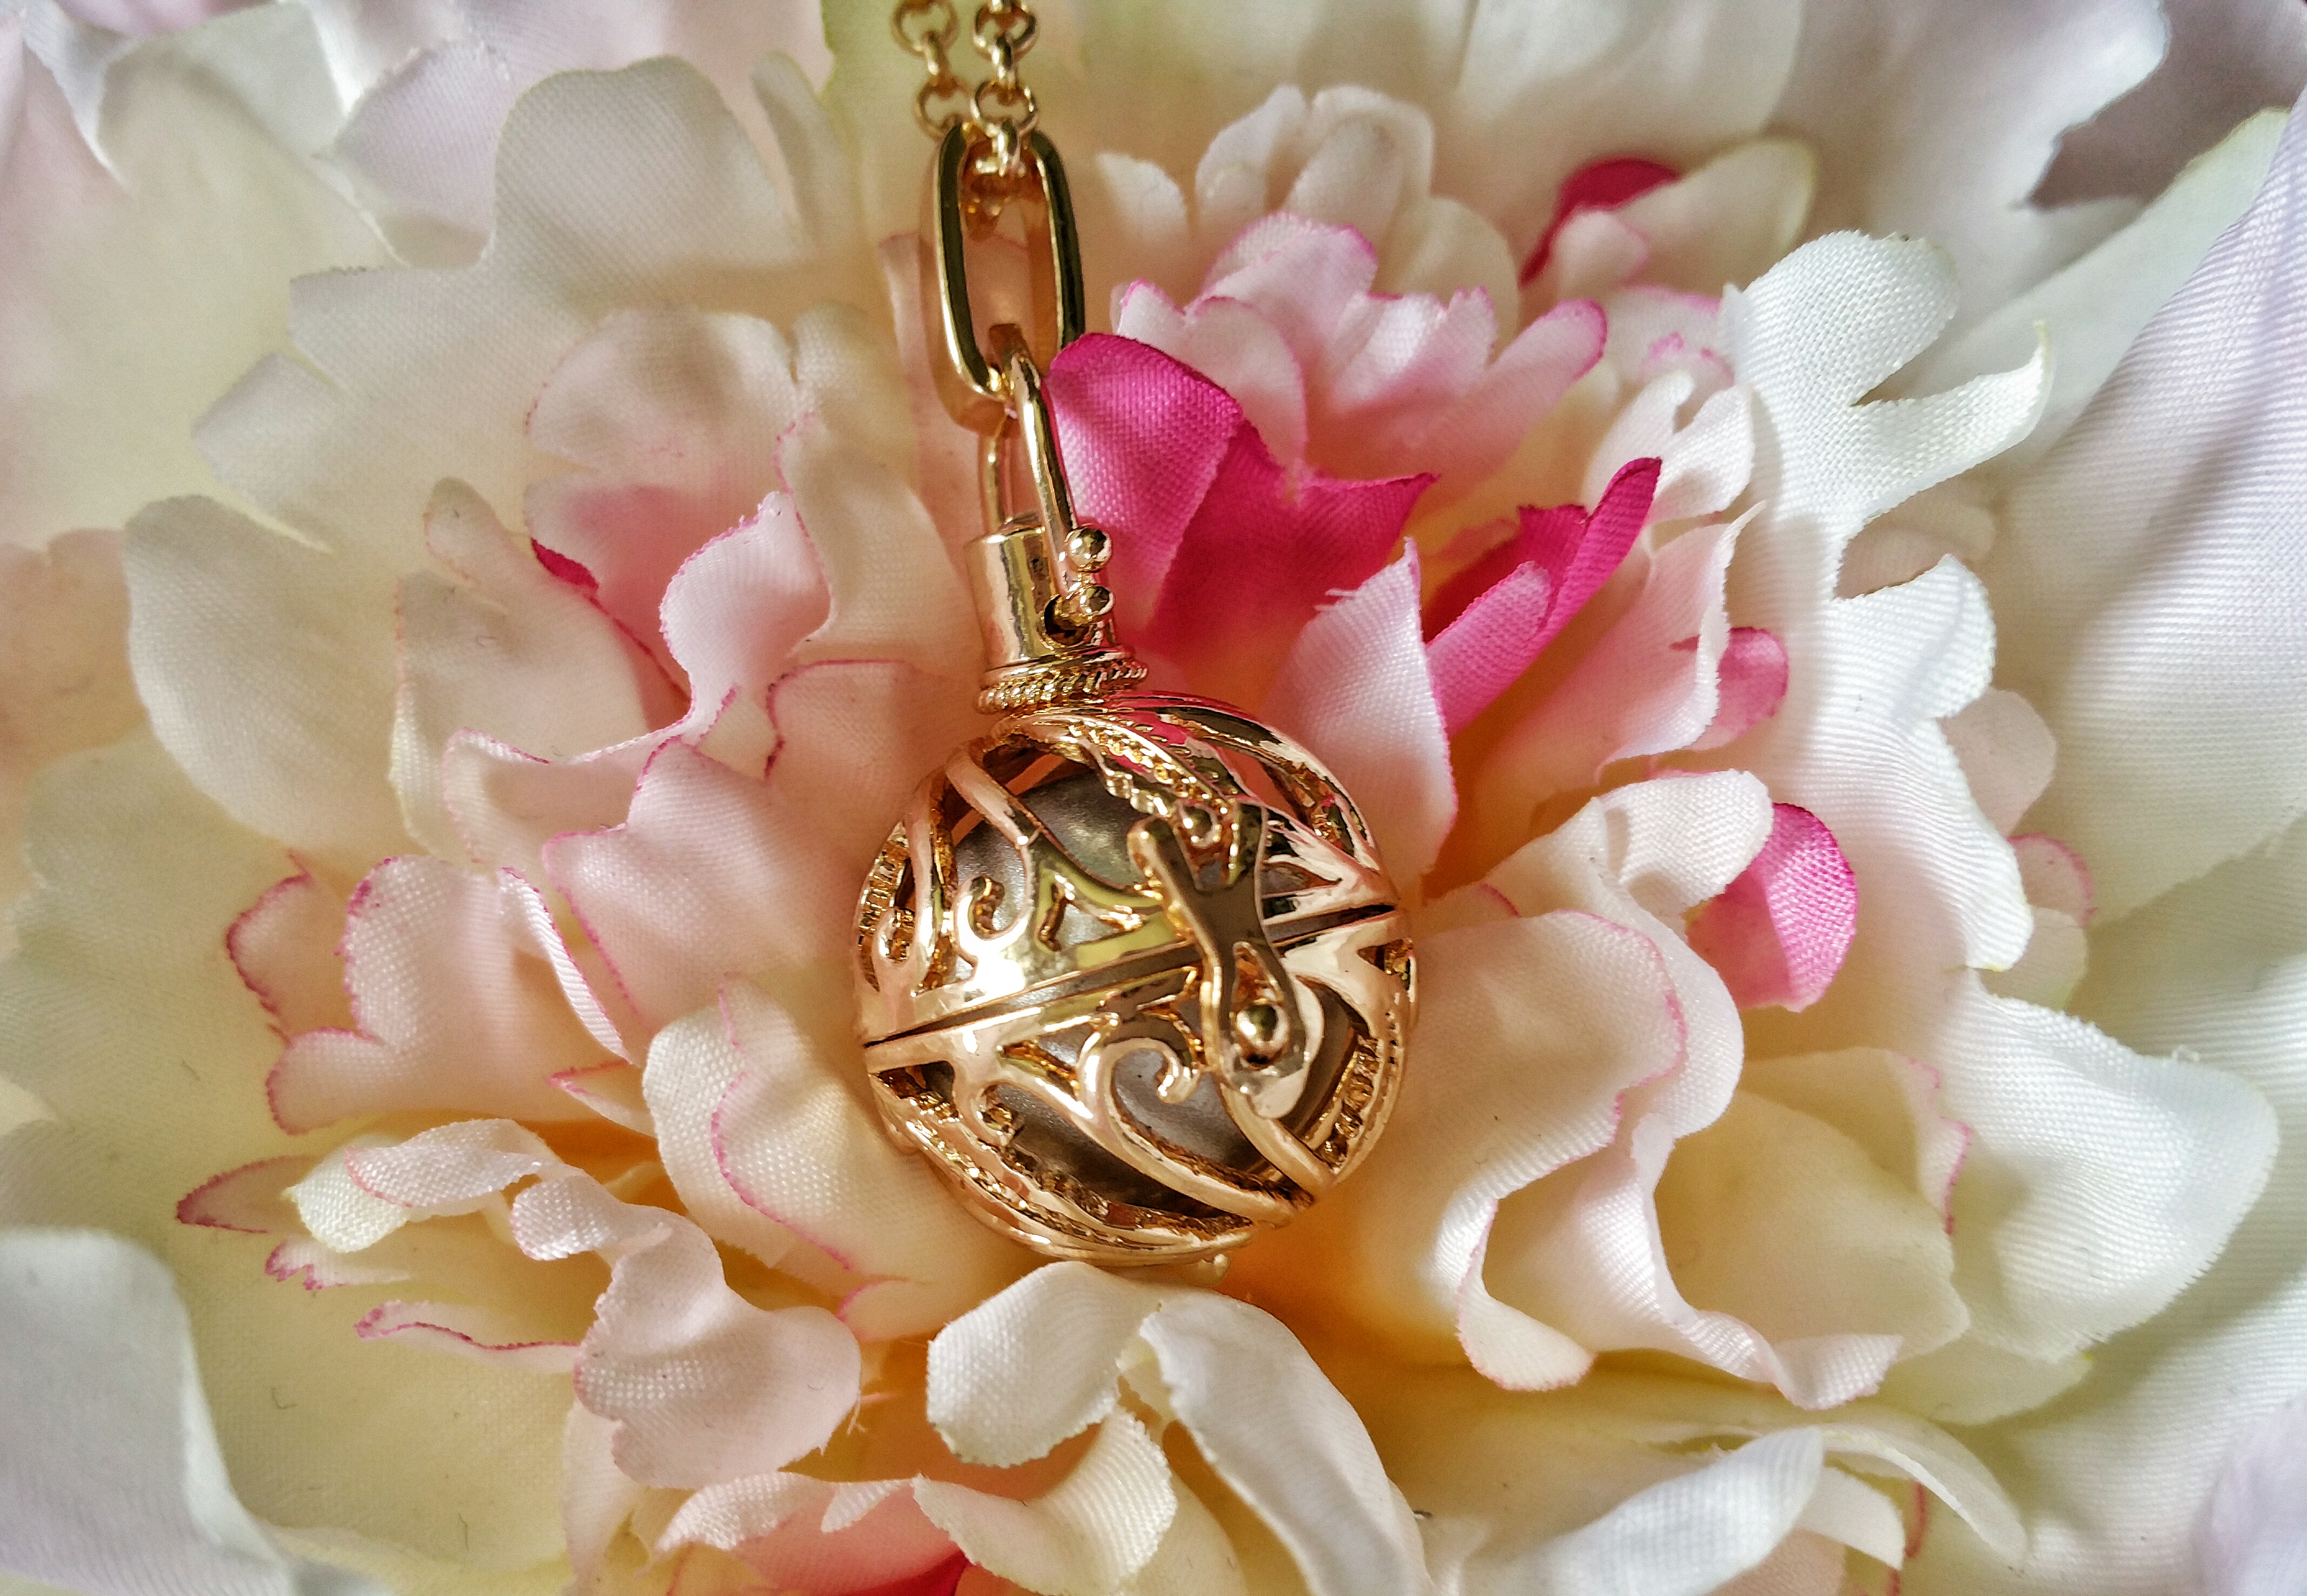 Yourself Expression, Angel Locket, Chime, Guardian Chimes, The grommet, accessory, jewelry, locket, gold, beautiful, fashion, style, jewelry piece, review, 